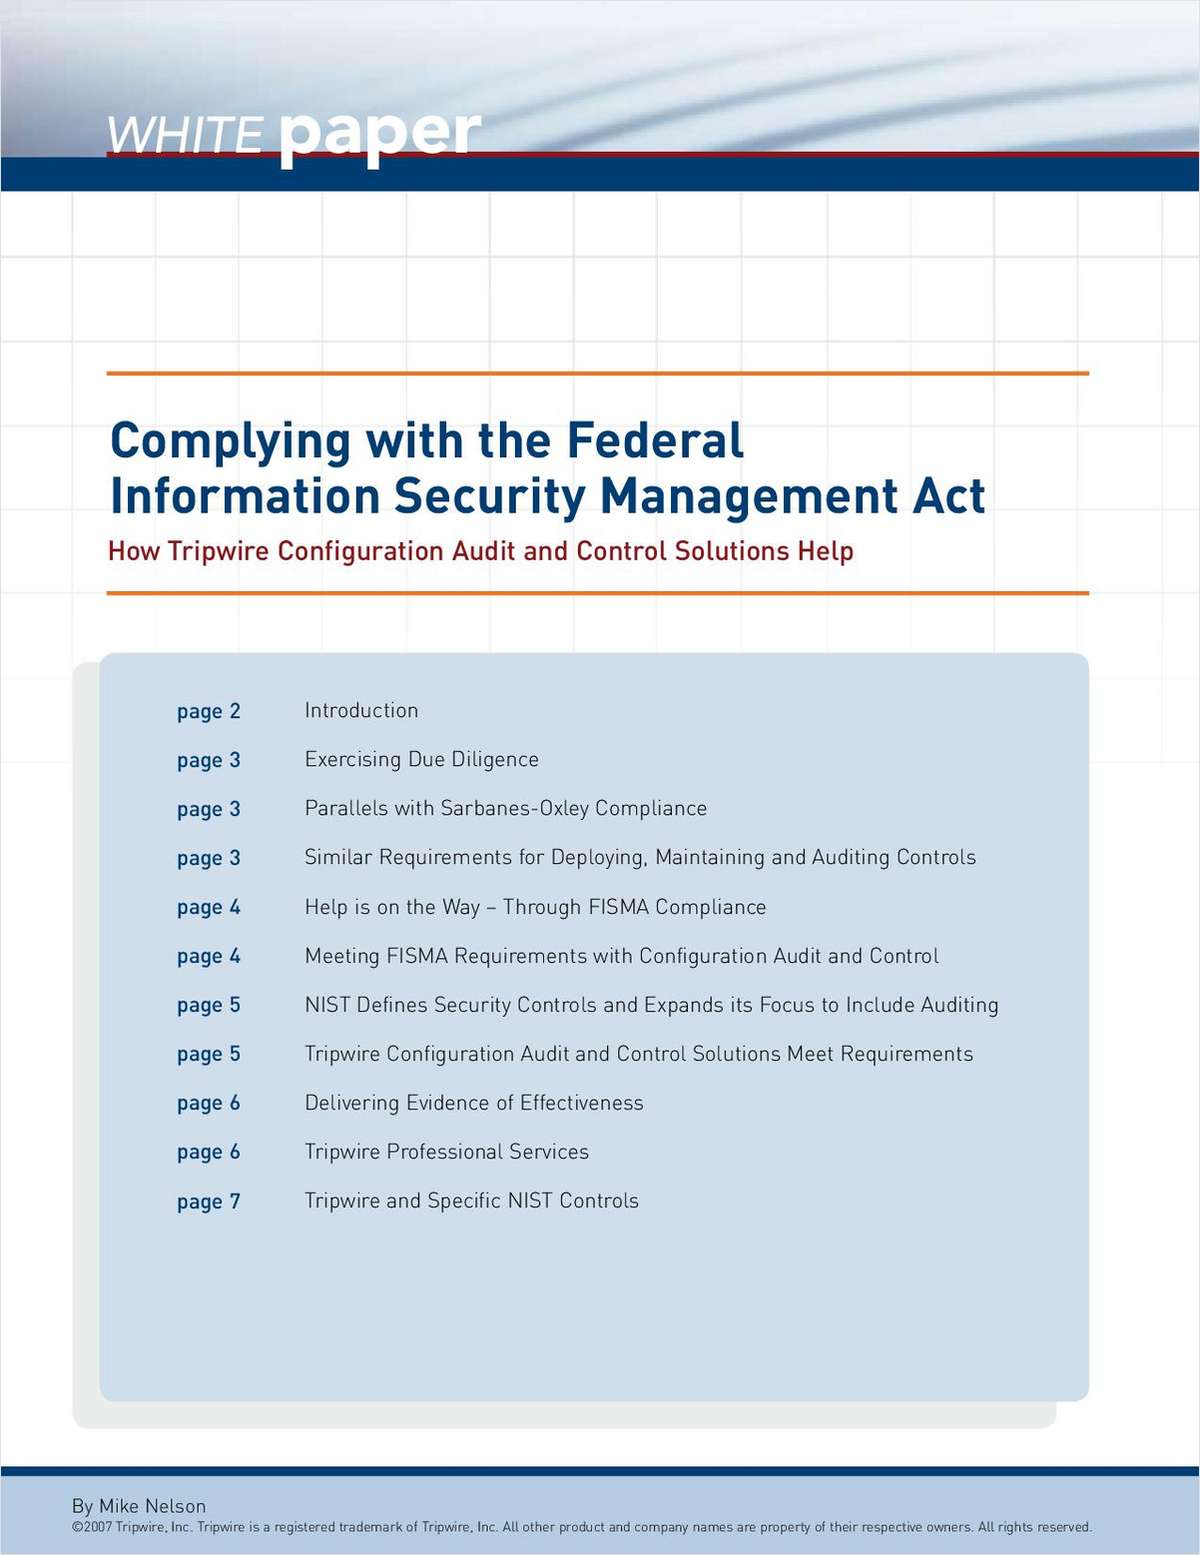 Complying with FISMA